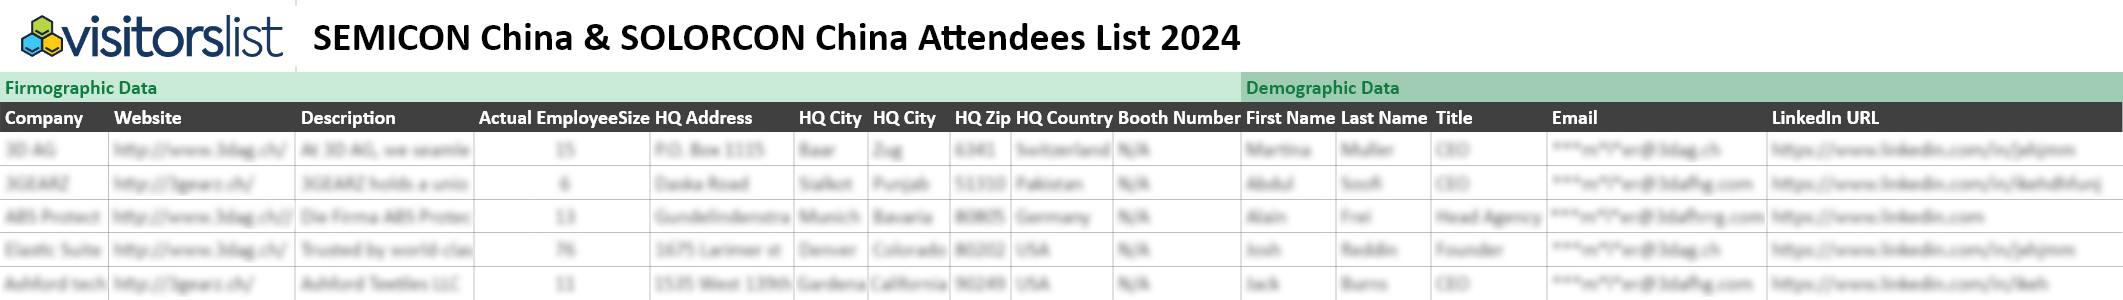 SEMICON China & SOLORCON China Attendees List 2024